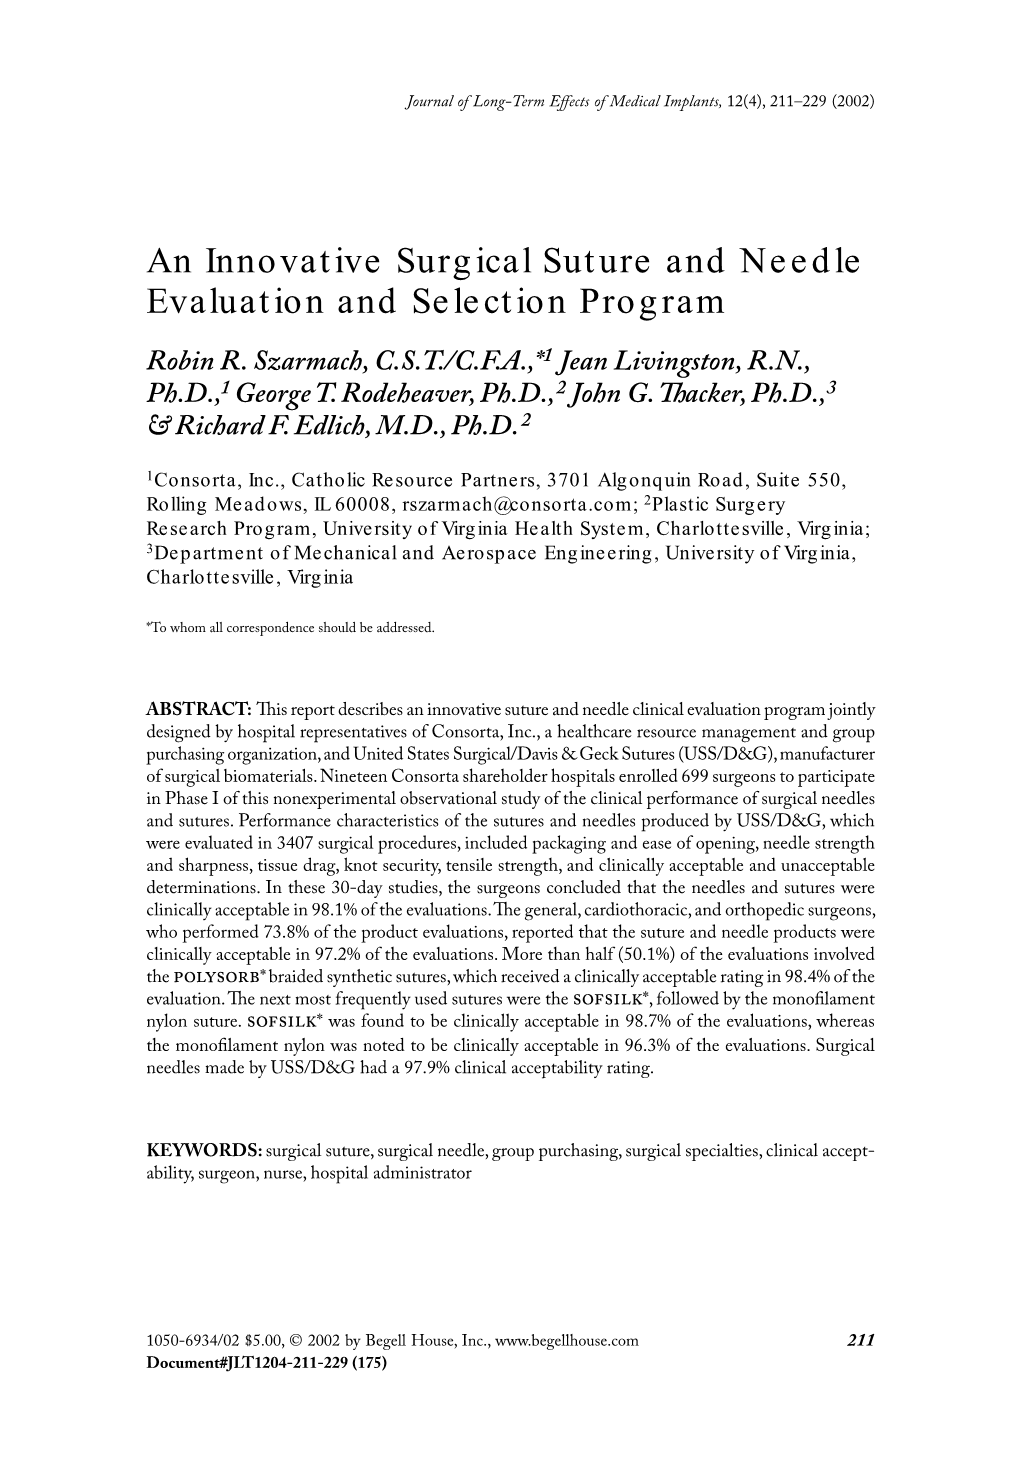 An Innovative Surgical Suture and Needle Evaluation and Selection Program Robin R